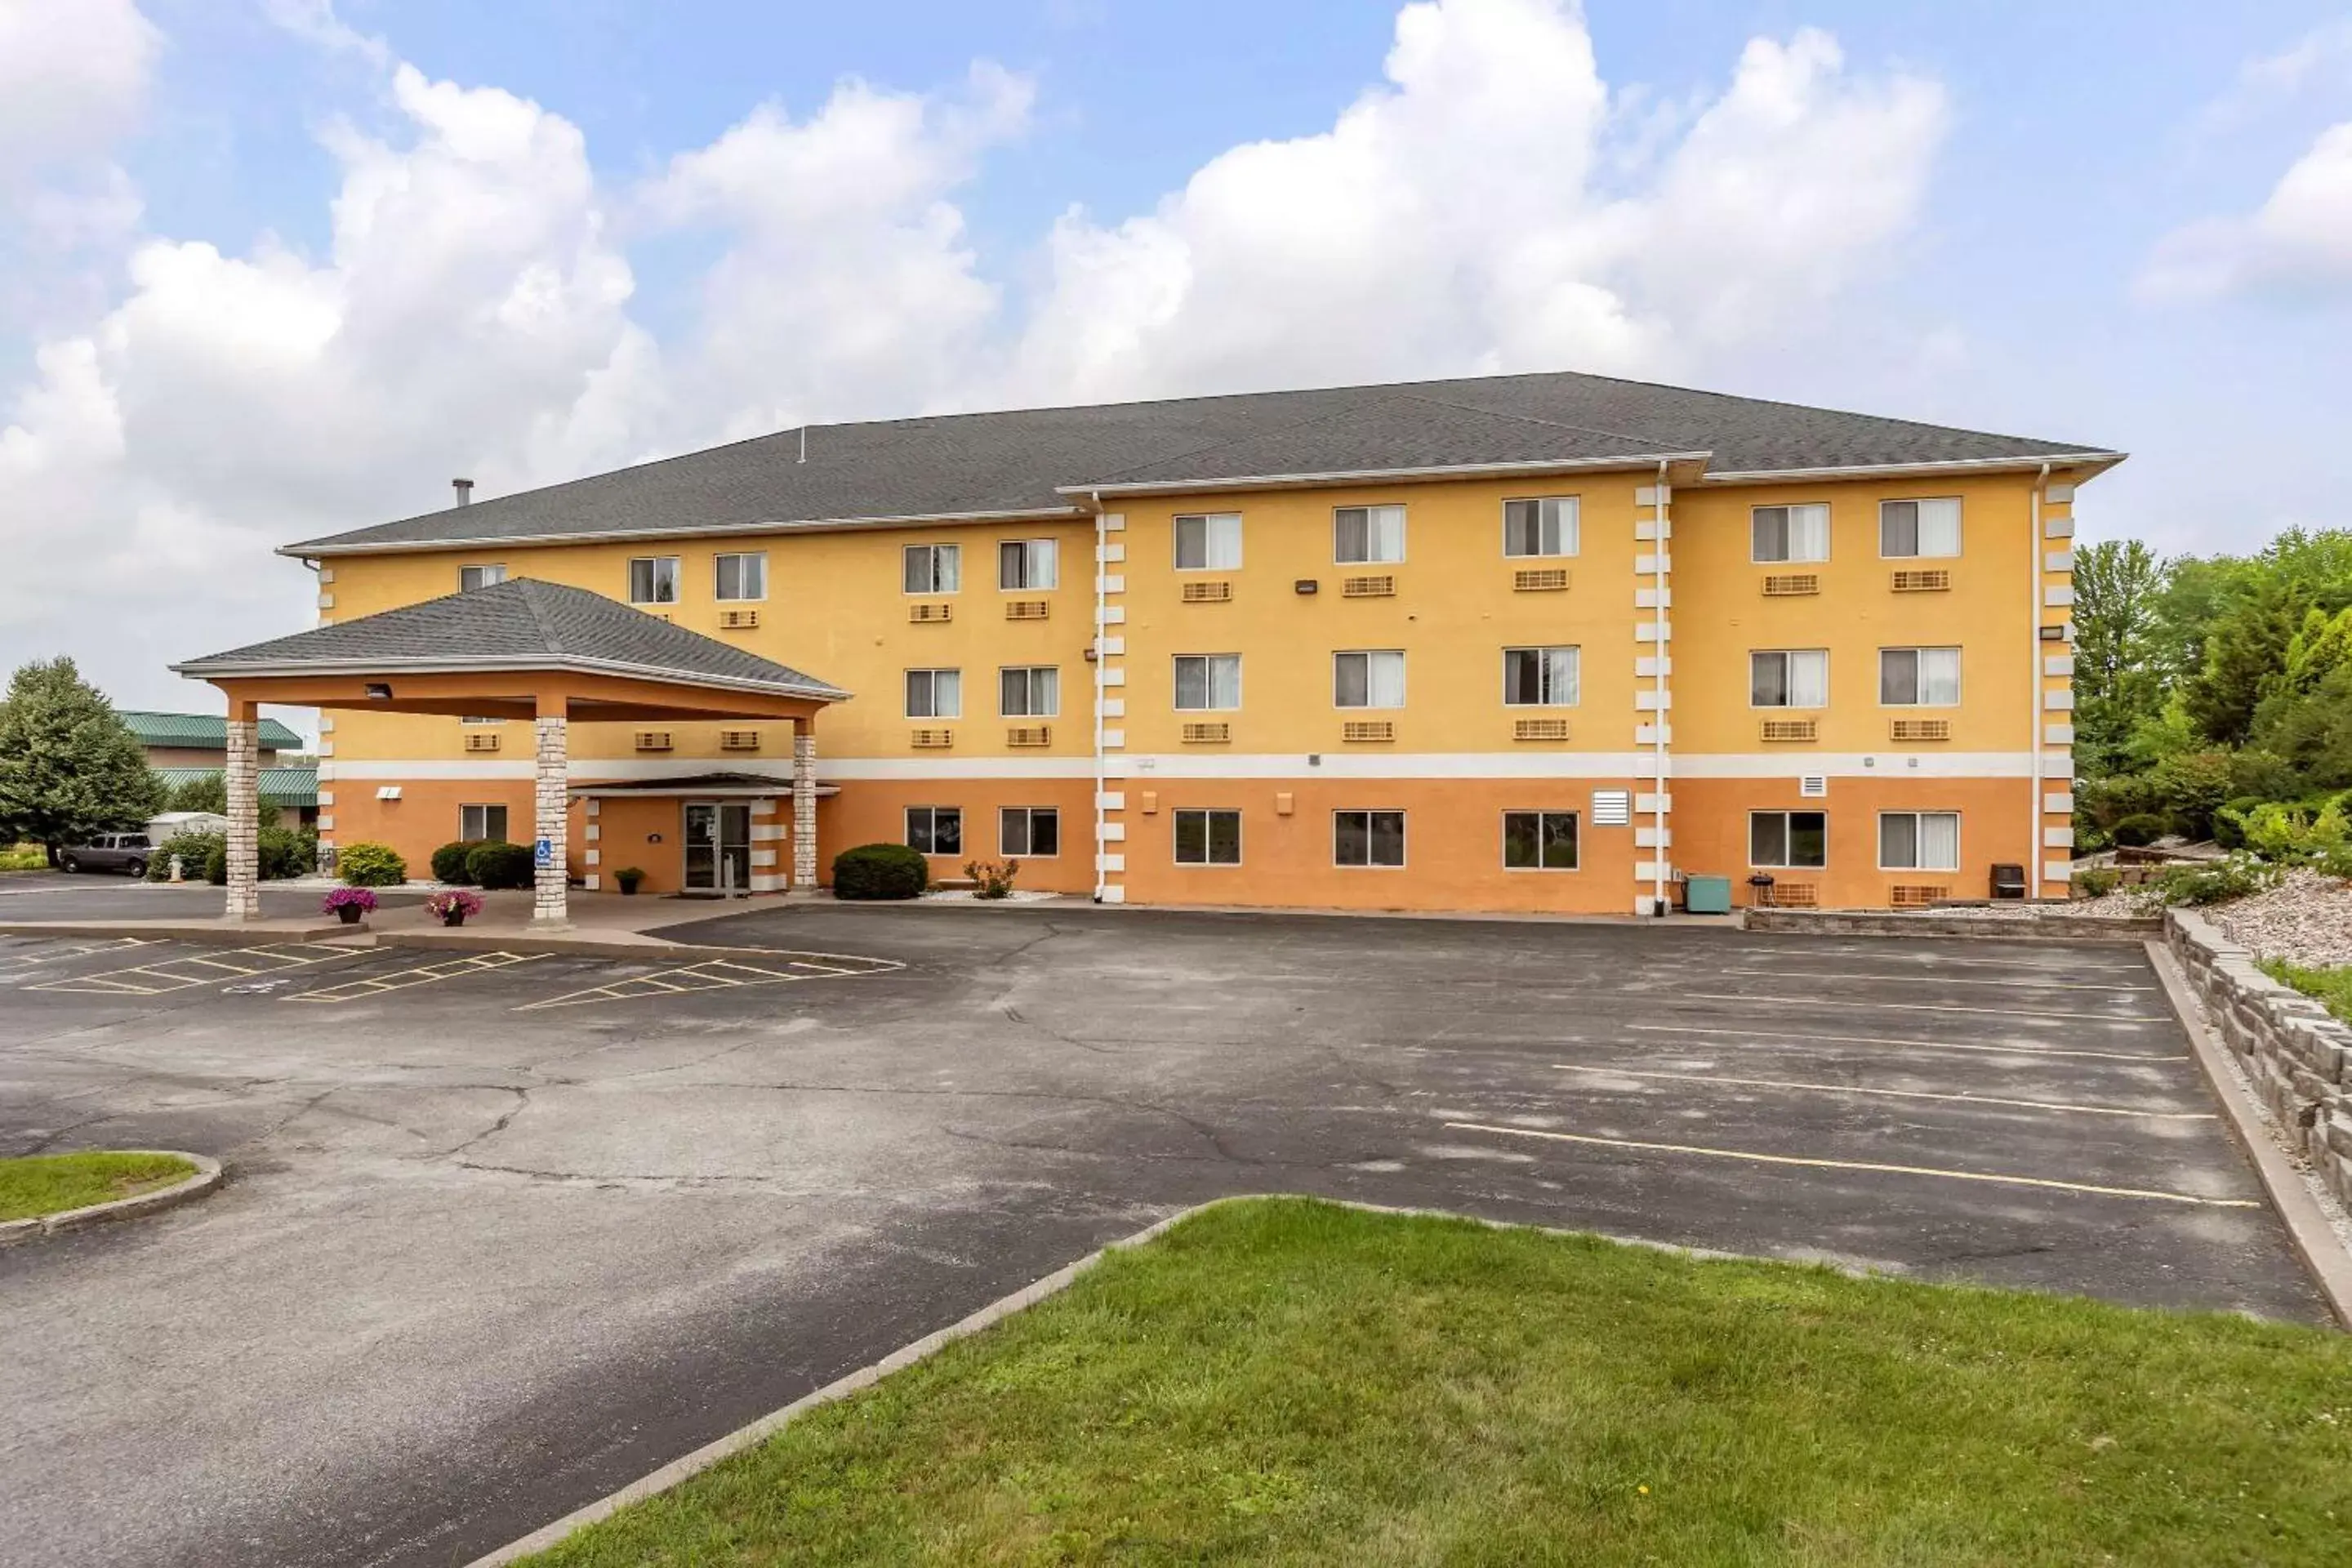 Property Building in Comfort Inn Muscatine near Hwy 61